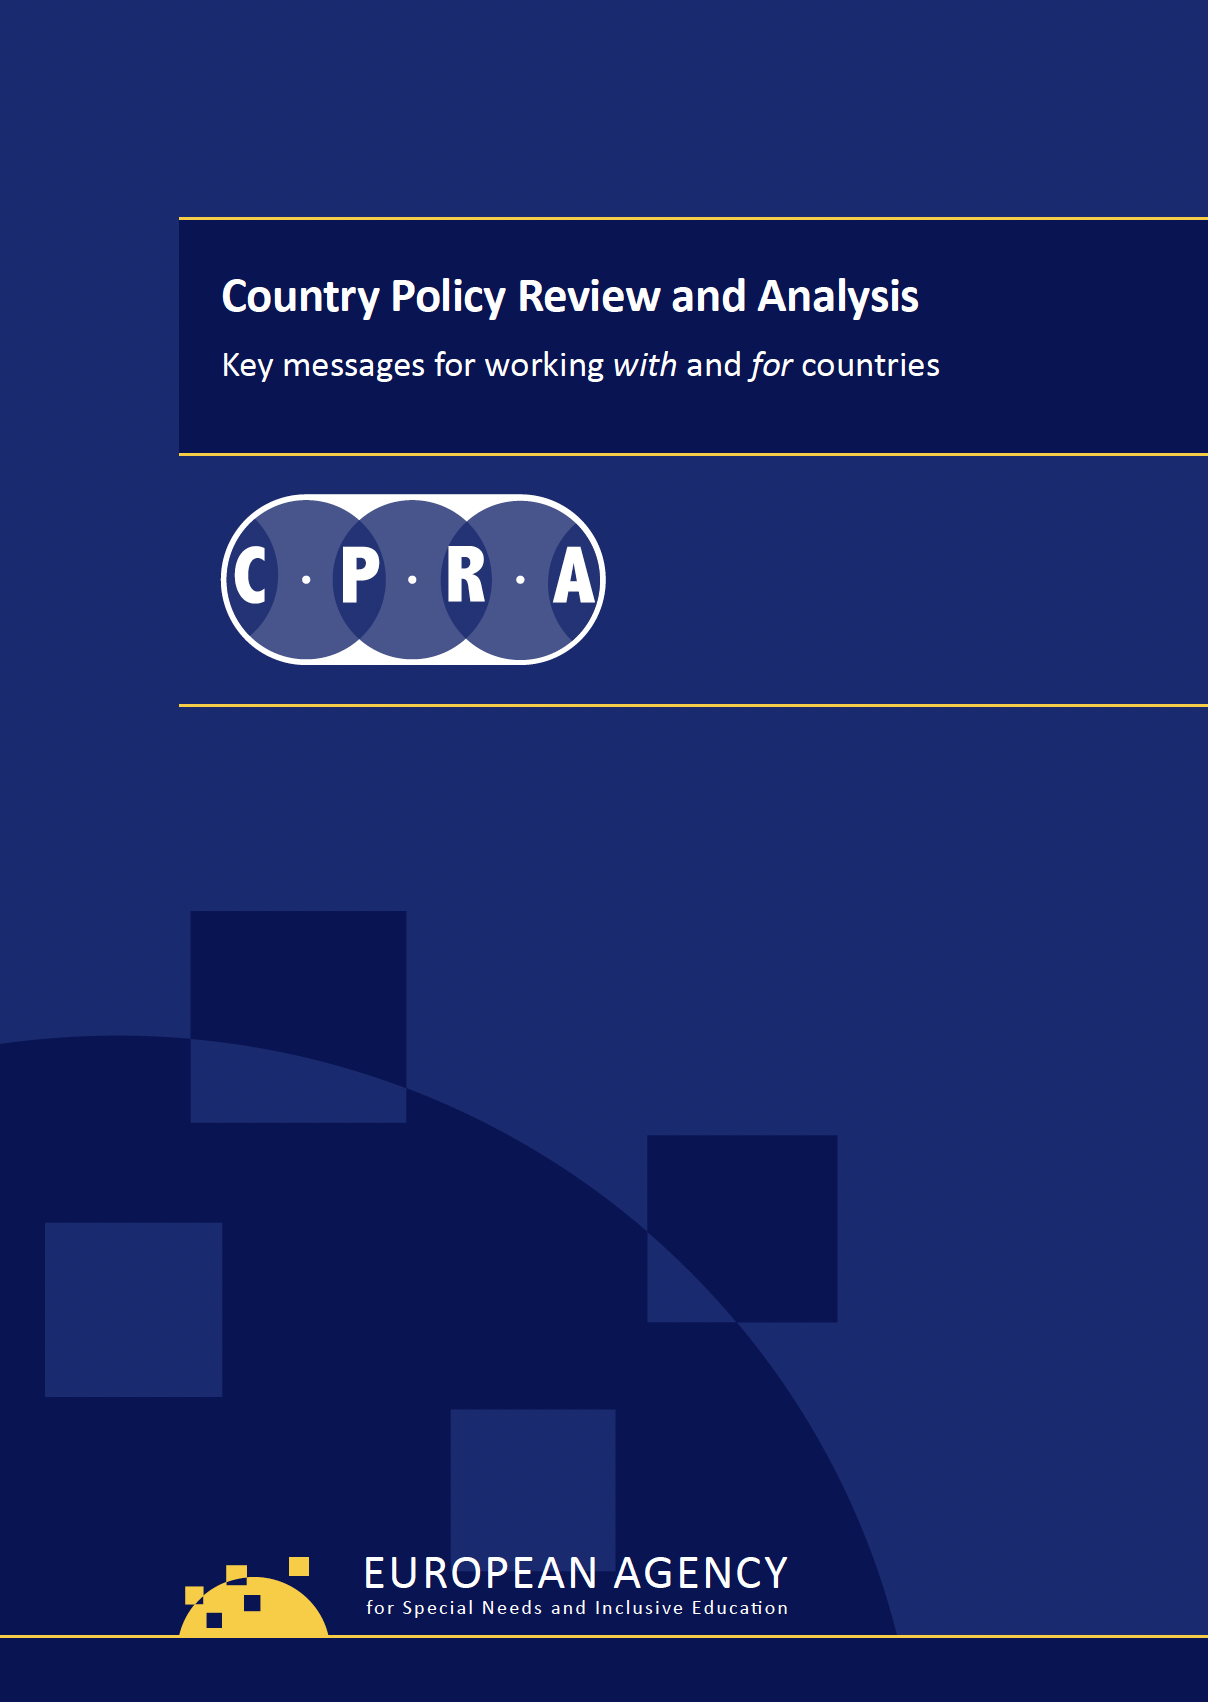 Country Policy Review and Analysis: Key messages for working with and for countries